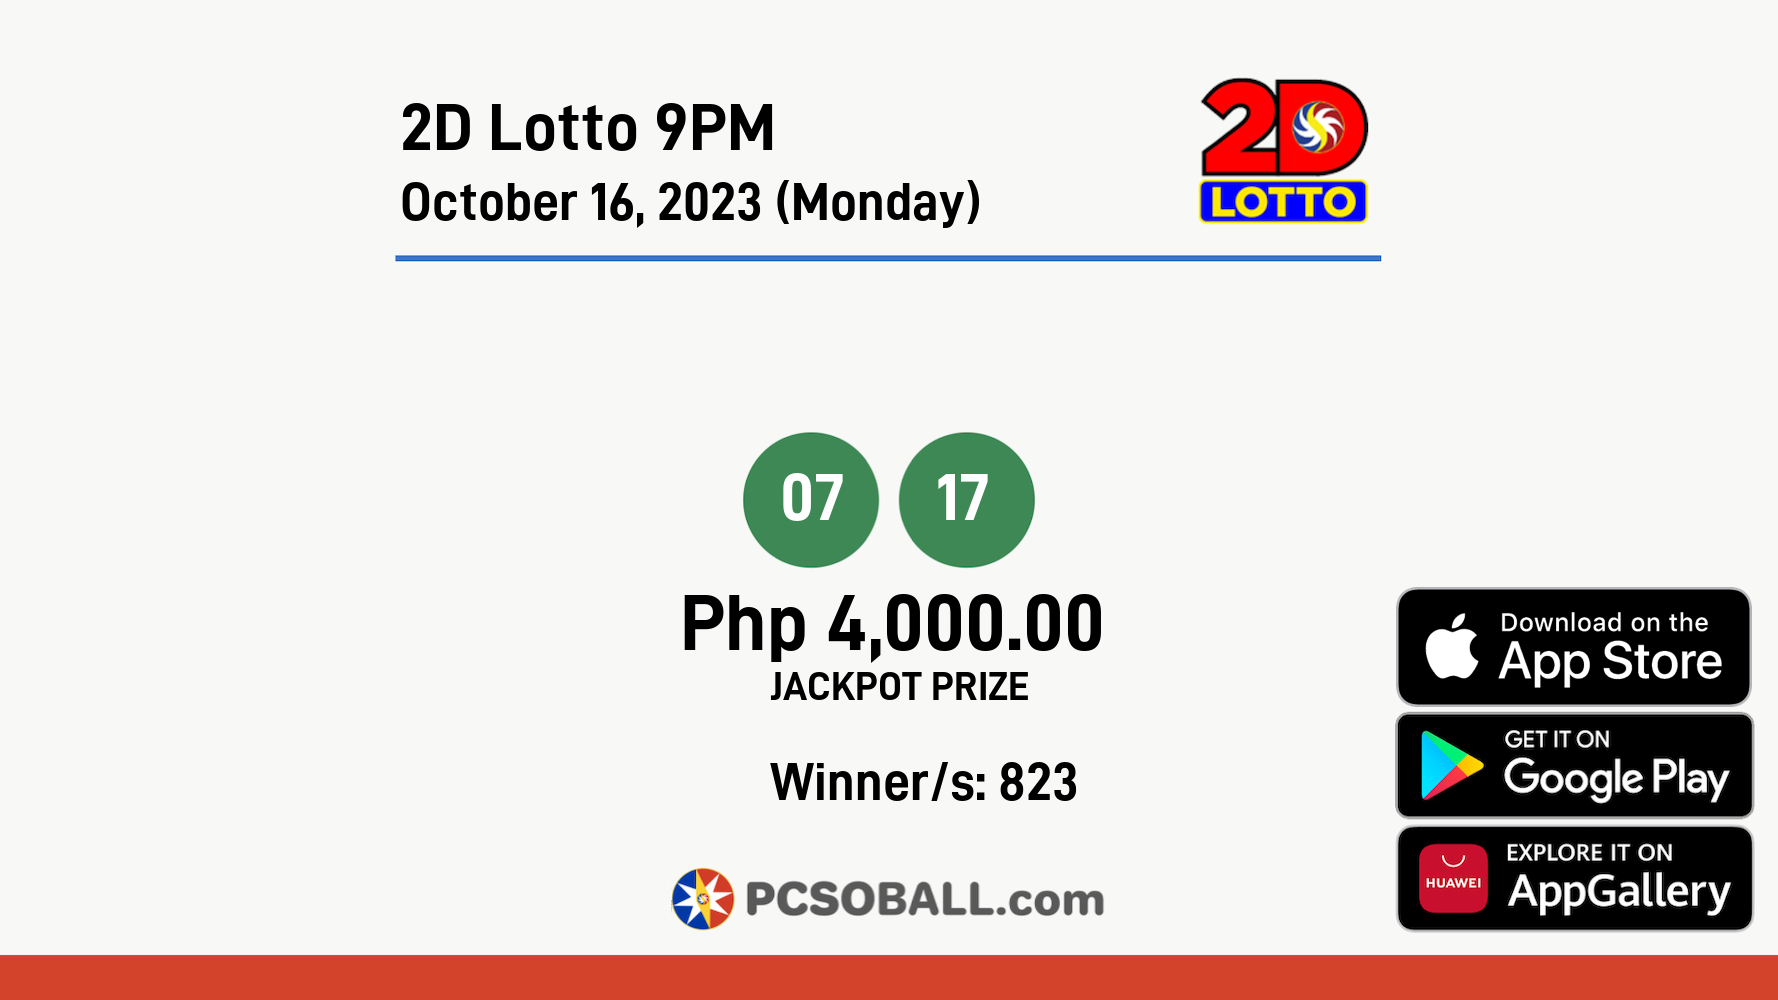 2D Lotto 9PM October 16, 2023 (Monday) Result